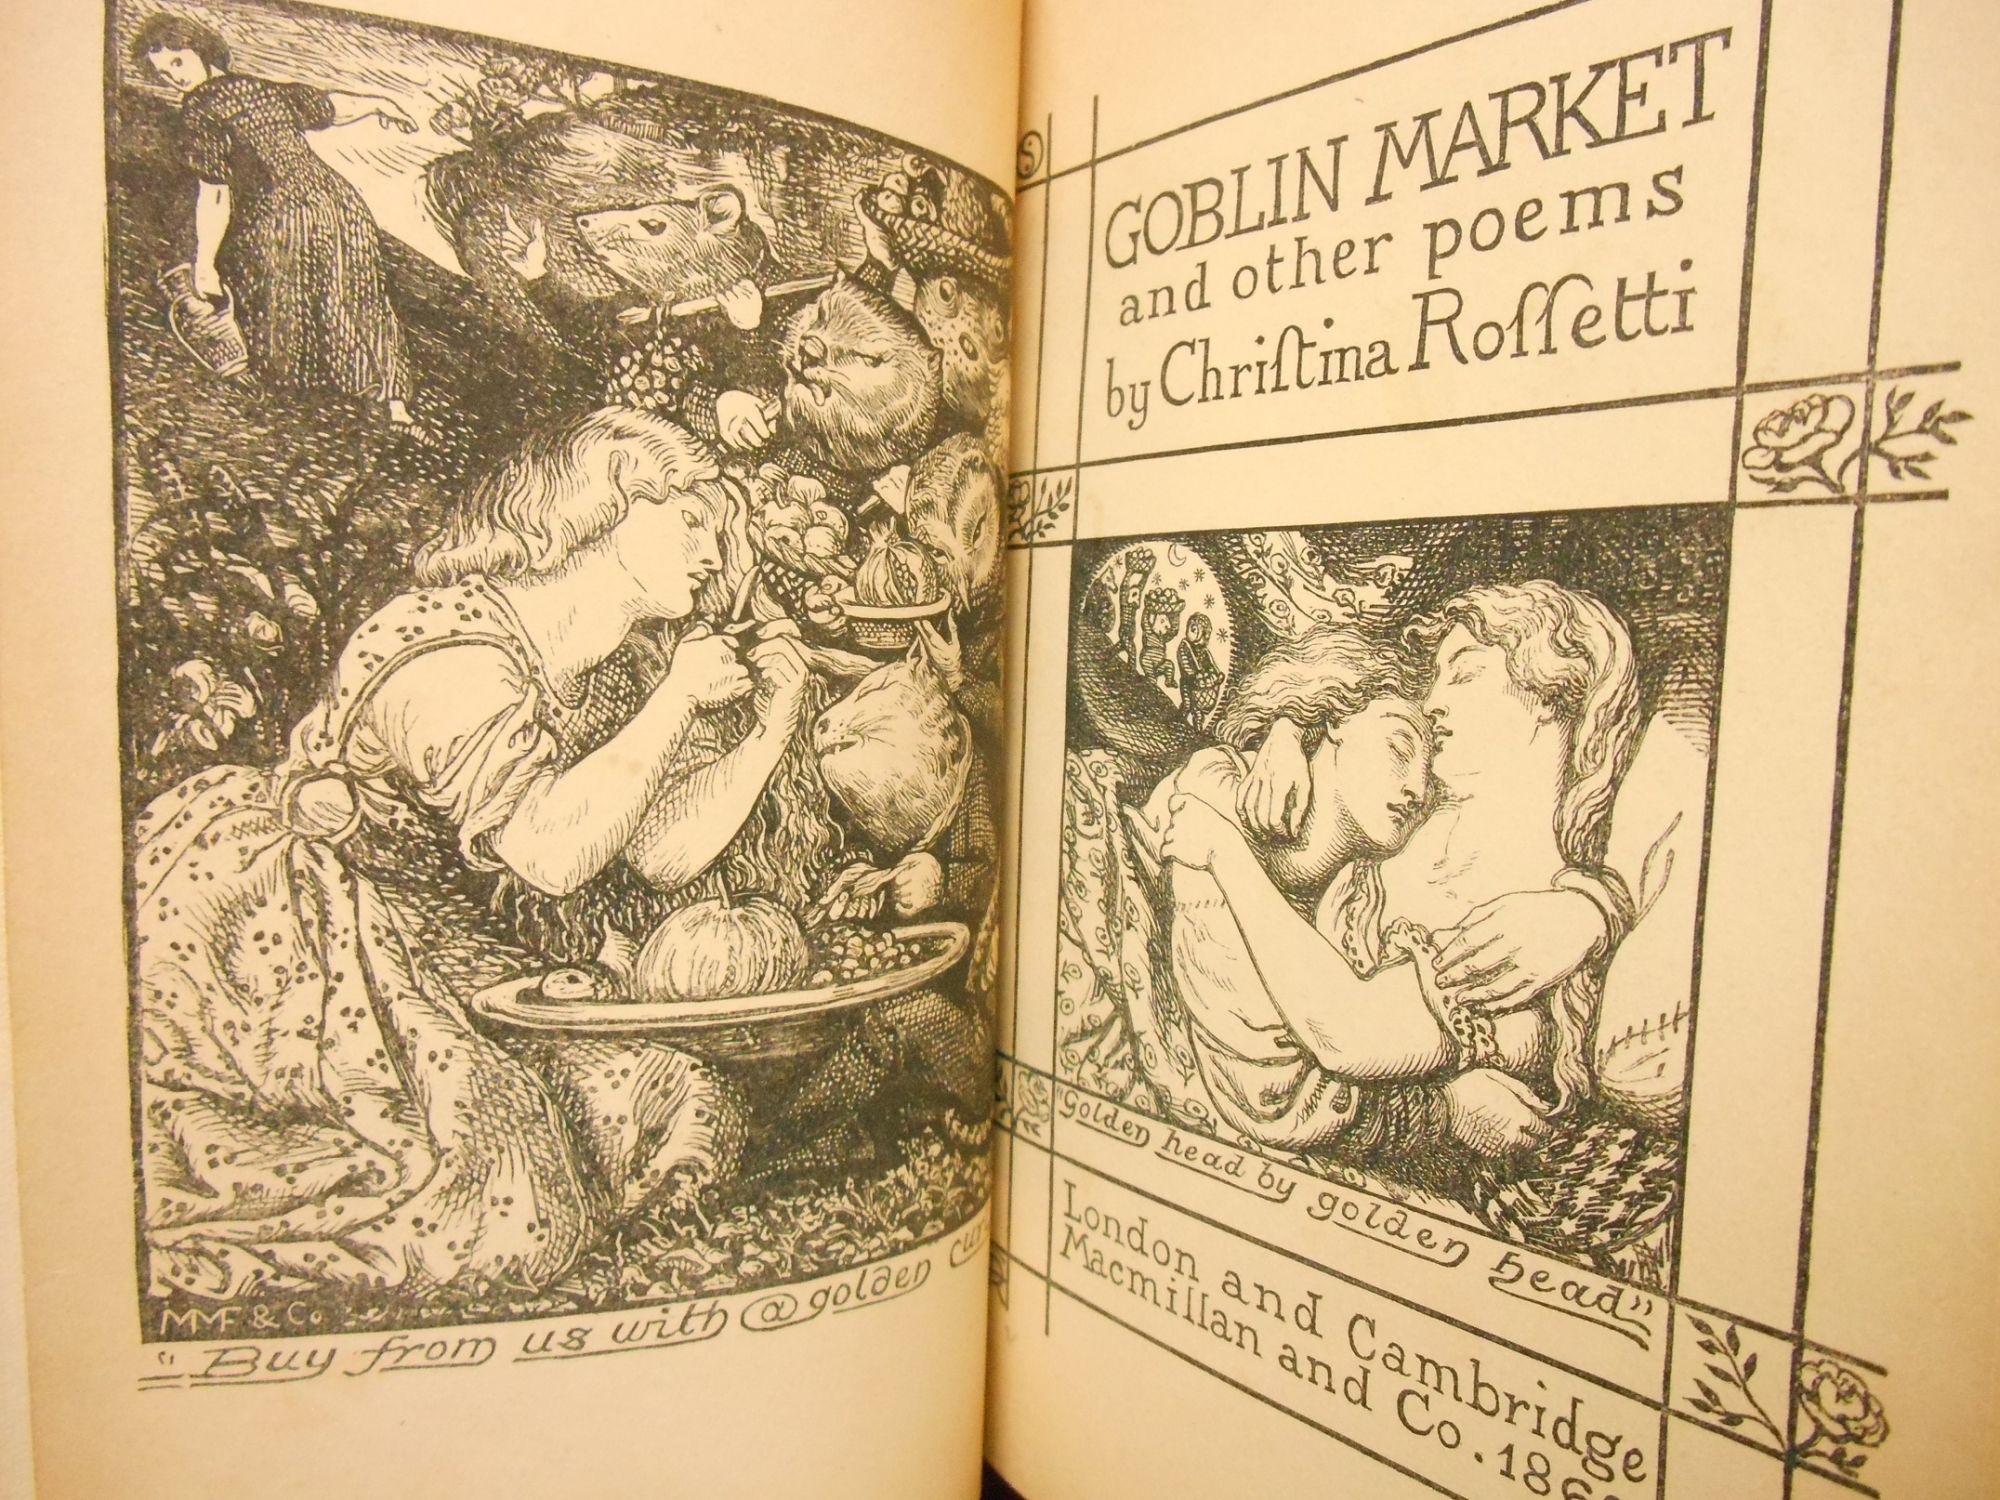 Goblin Market; and Other Poems by Christina Rossetti on Swan's Fine Books